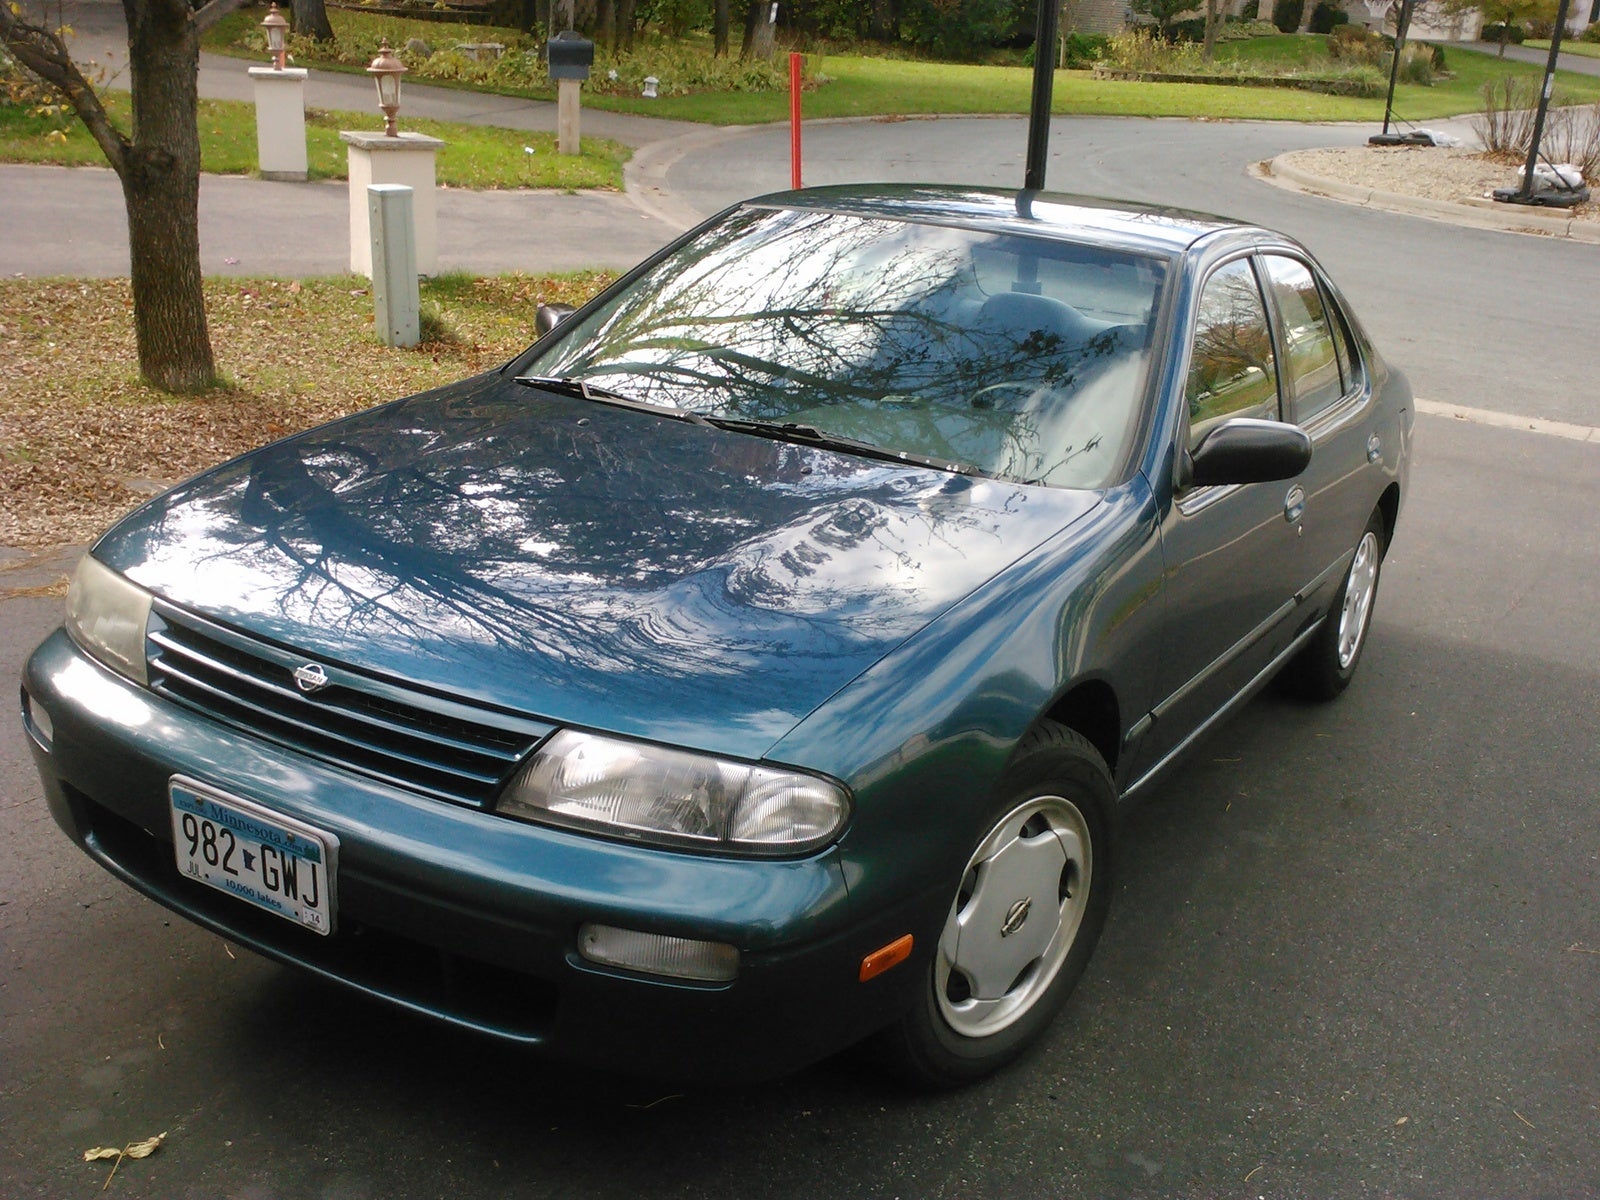 What is the drive cycle for a 1997 nissan altima